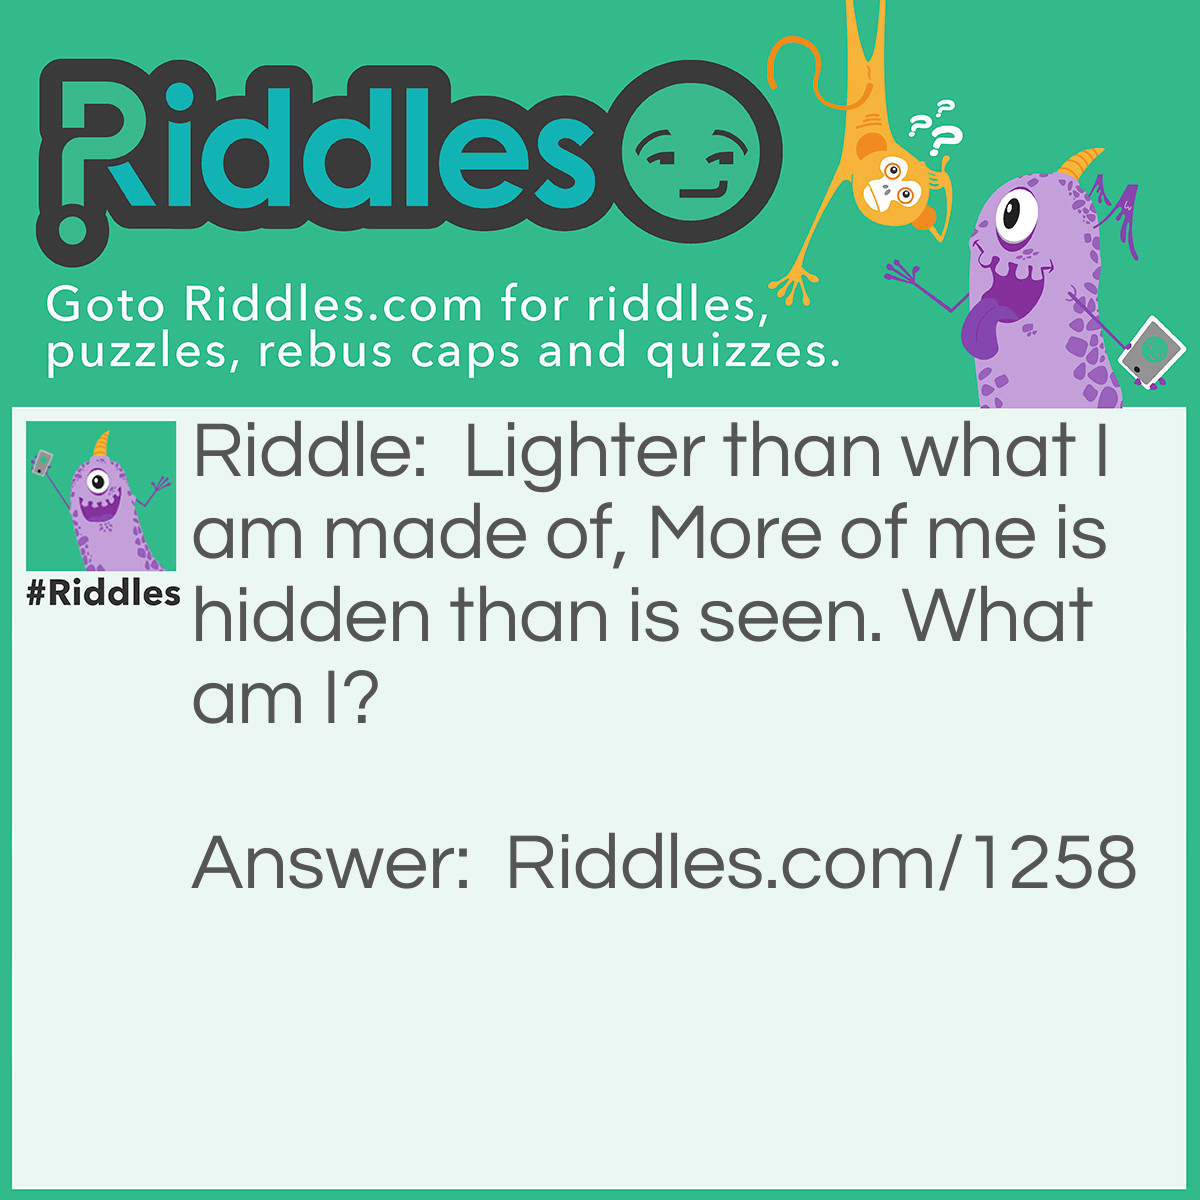 Riddle: Lighter than what I am made of, More of me is hidden than is seen. What am I? Answer: An iceberg.